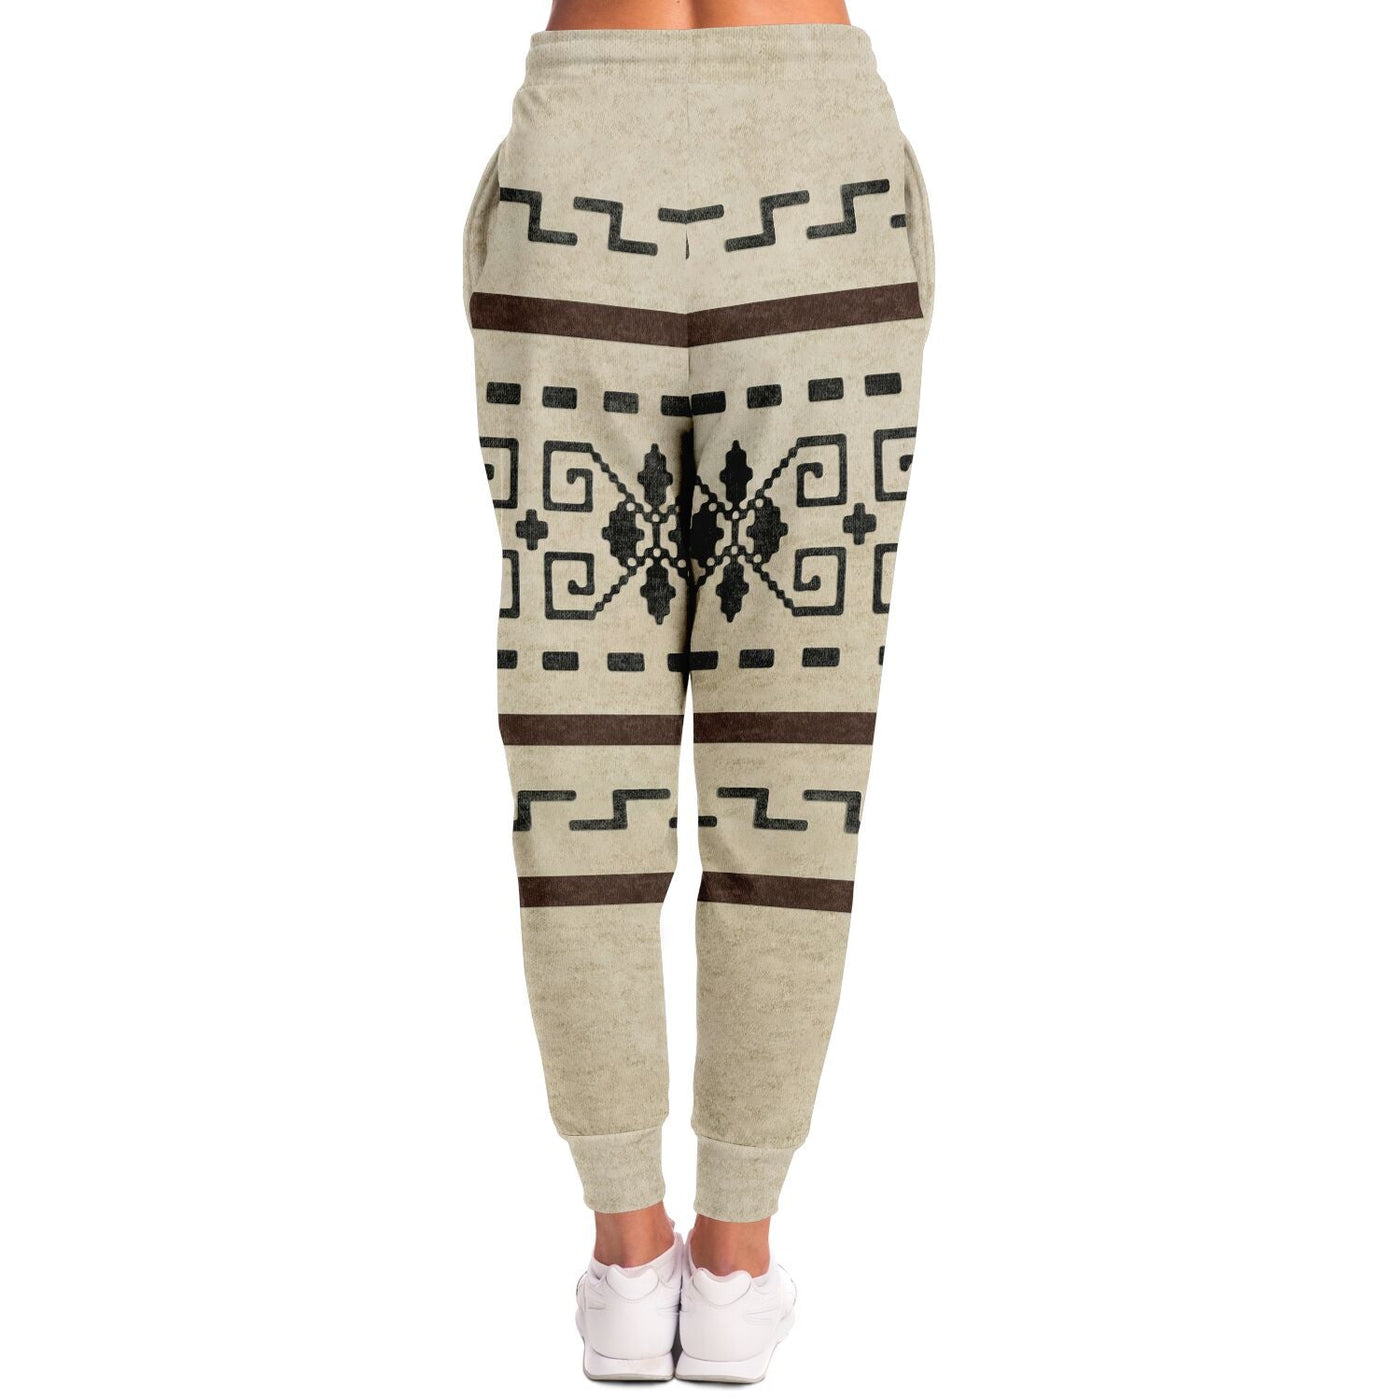 The Dude's Joggers Pants w/ Iconic Lebowski Sweater Pattern